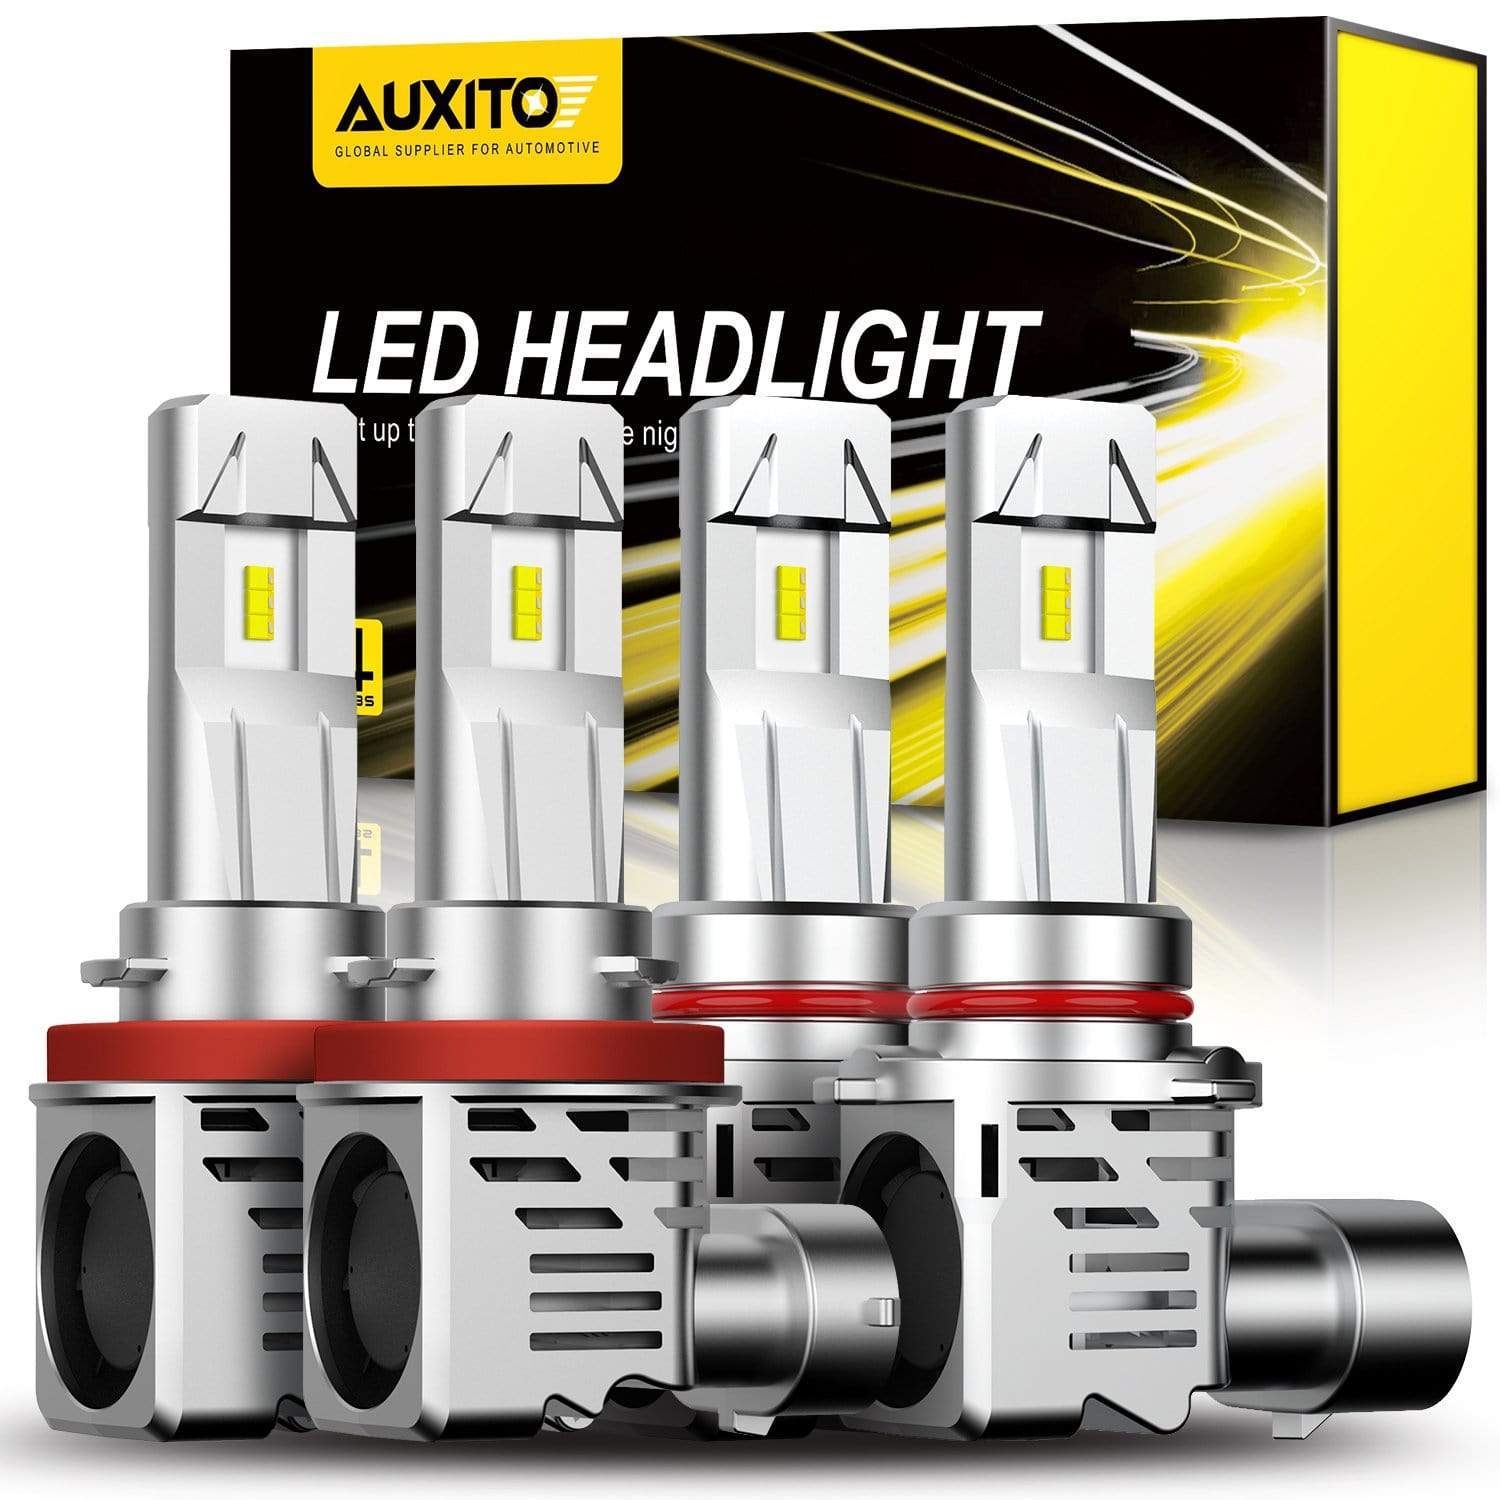 H11 LED Bulb Headlight Forward Lighting 400% Brighter, Mini Size, 80W  16,000LM Per Pair, CanBus Ready, Beam Adjustable Lamp — AUXITO